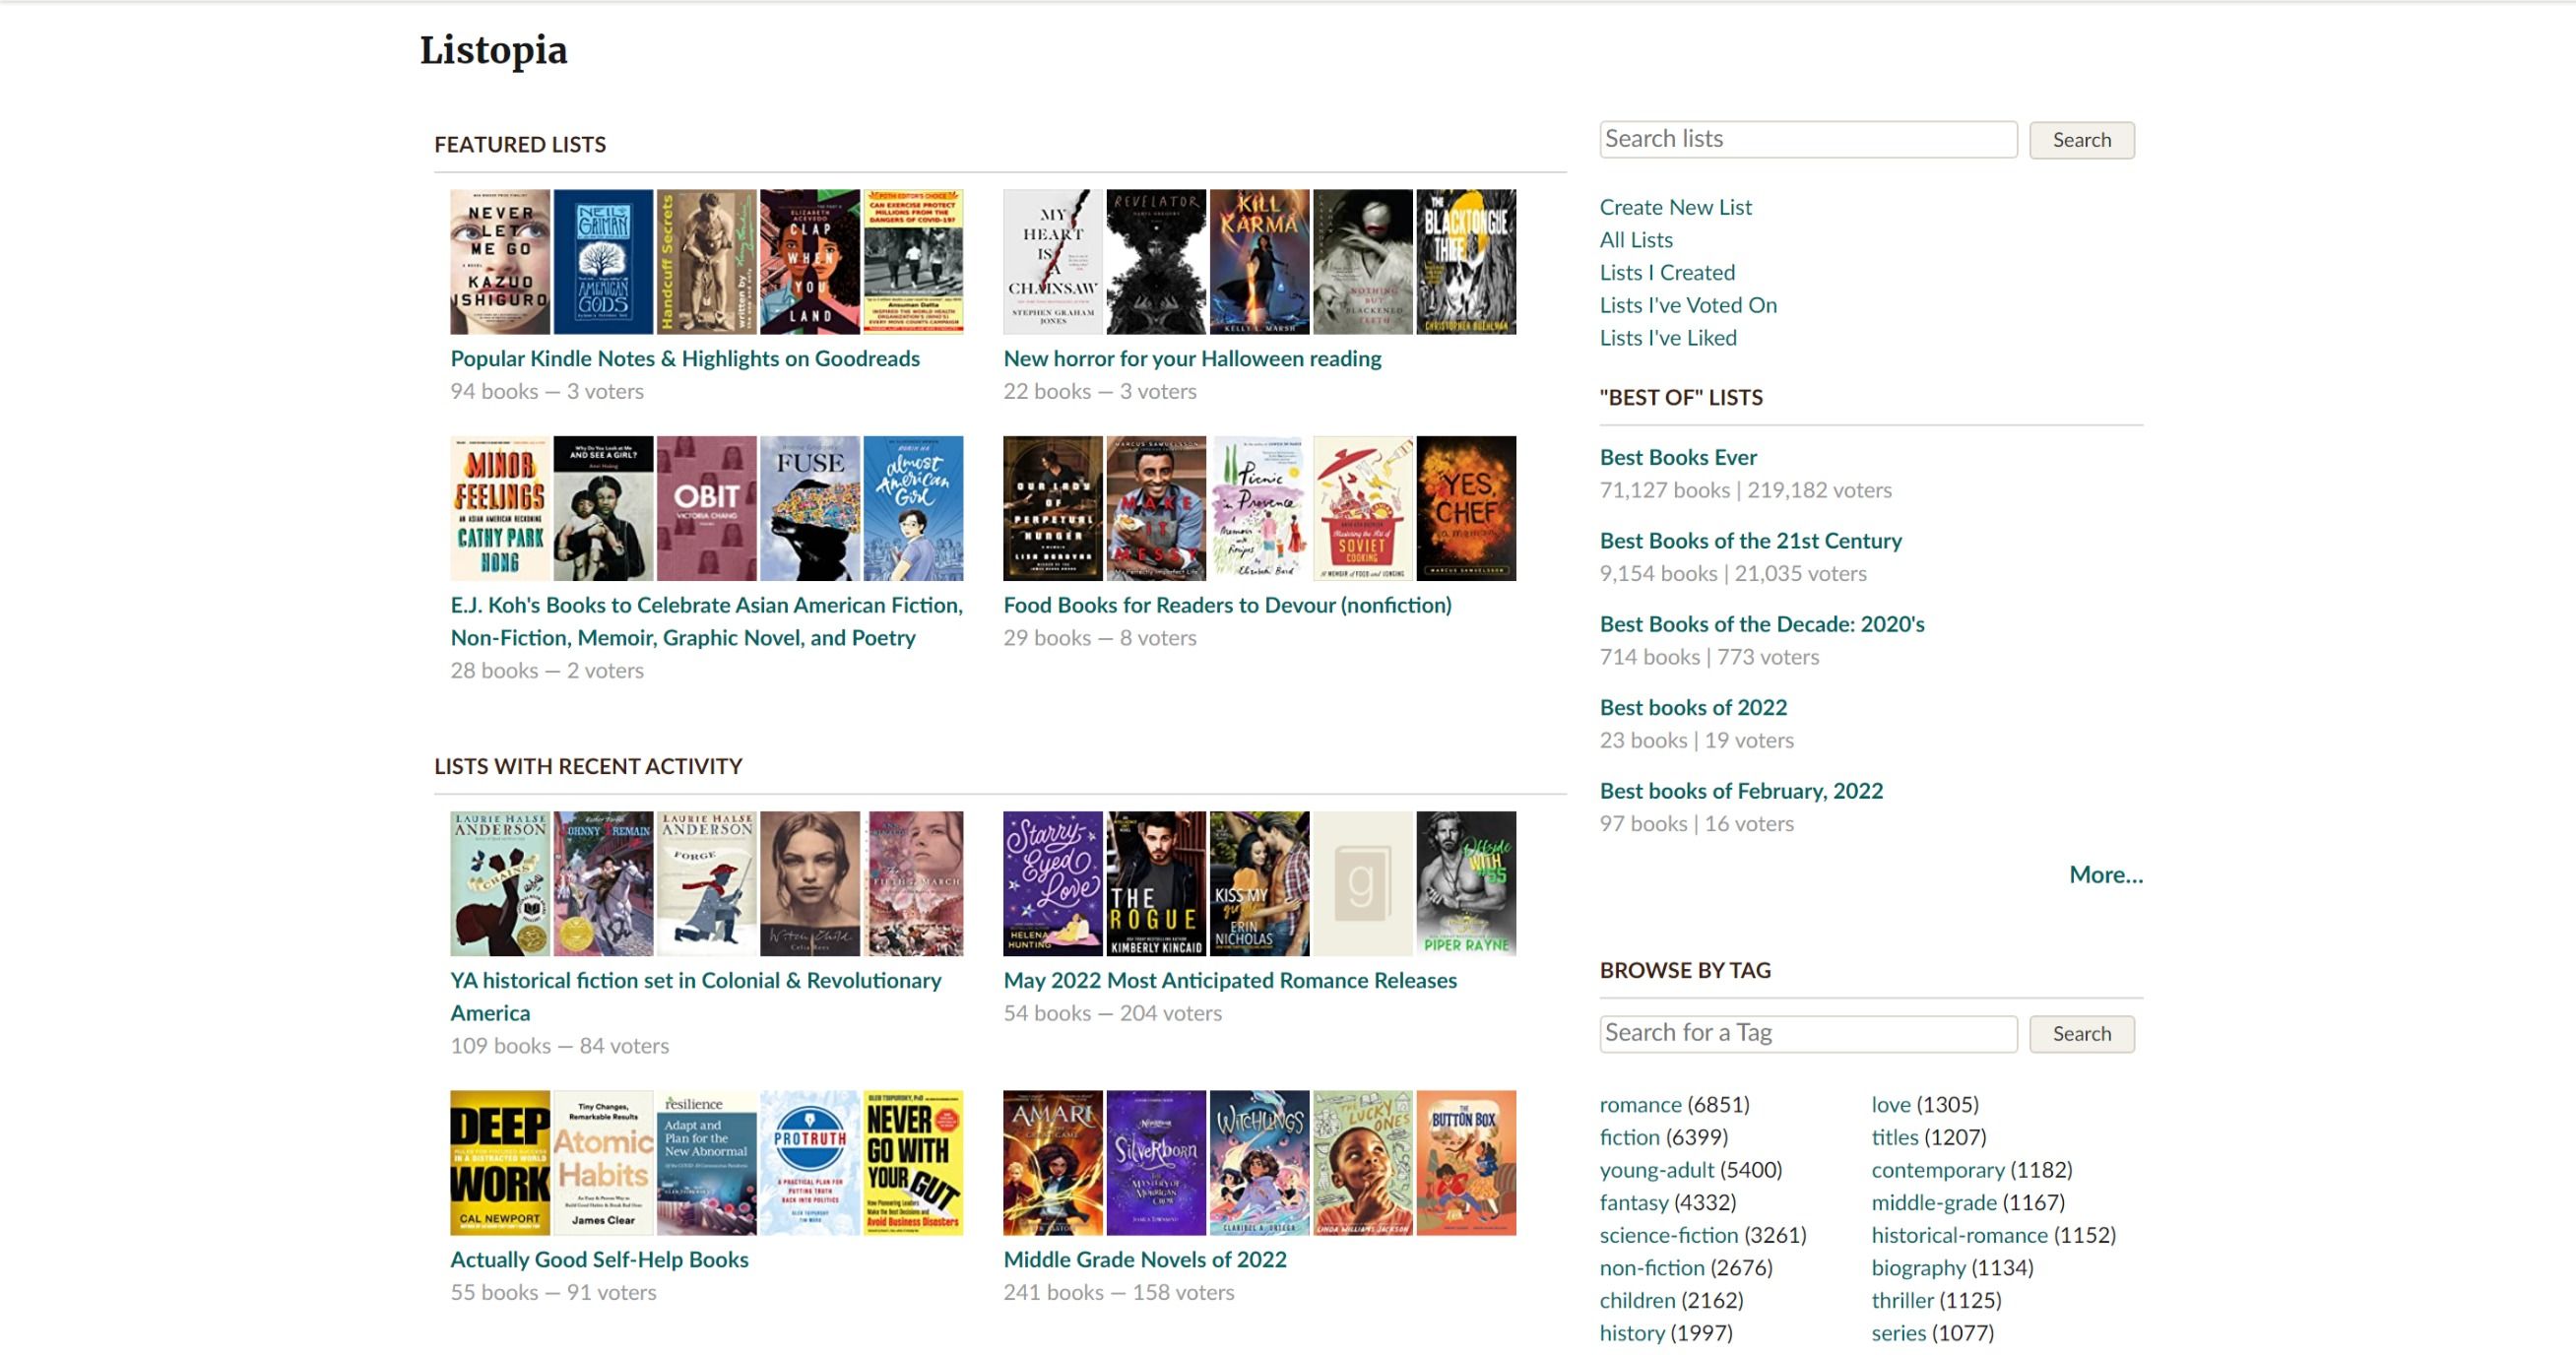 Screenshot of the home page to Goodreads Listopia